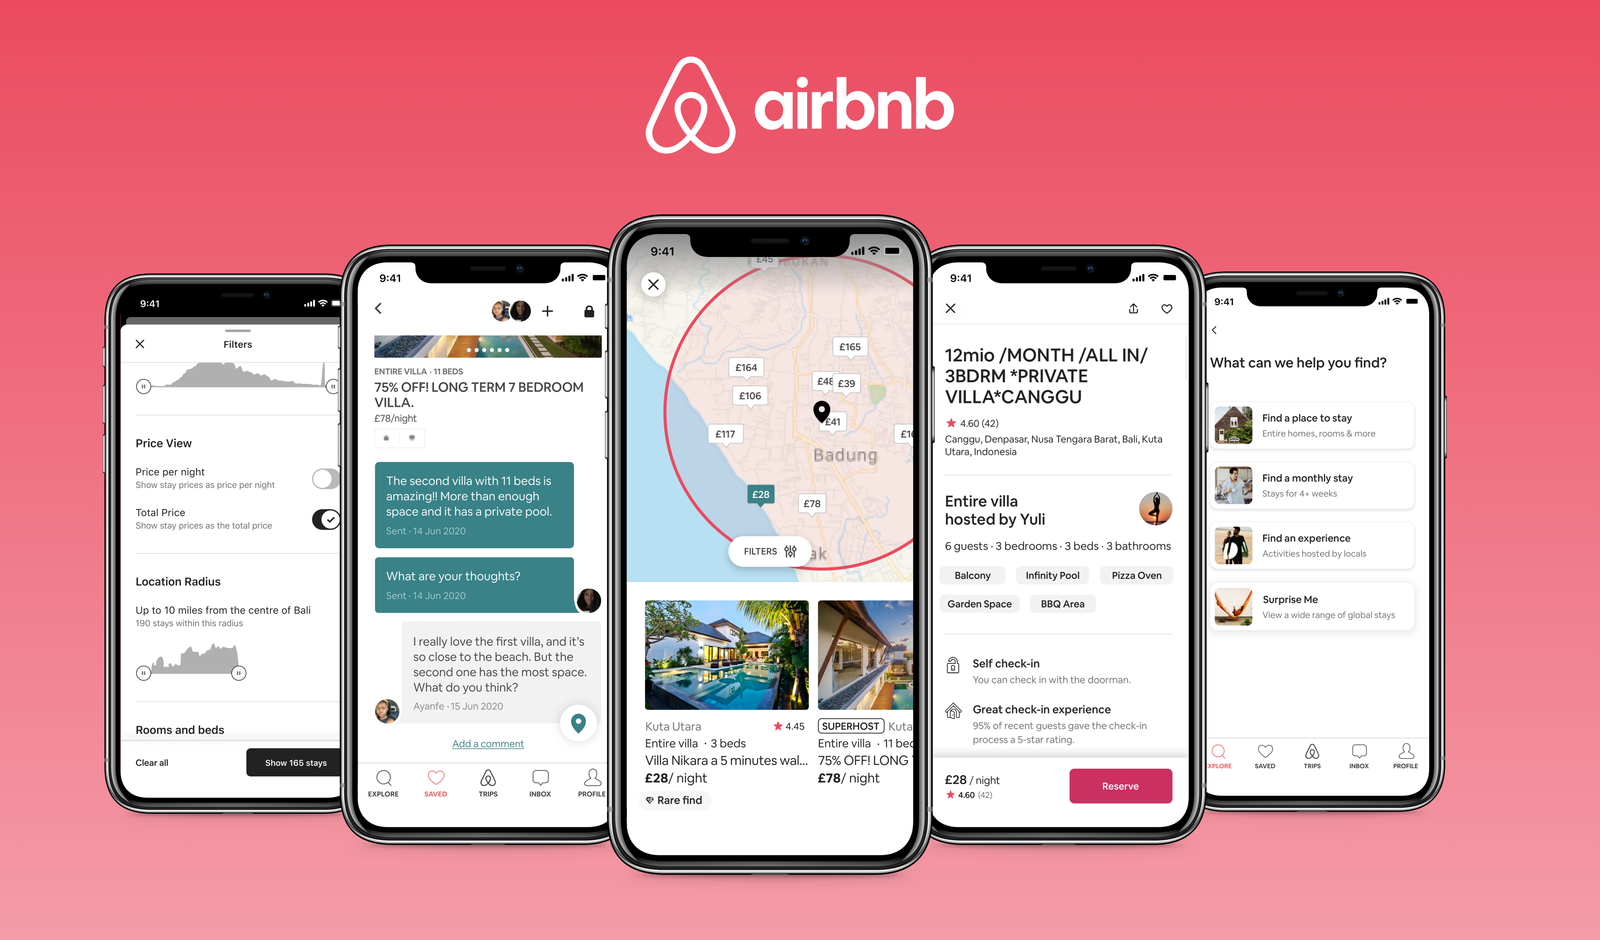 other apps like airbnb